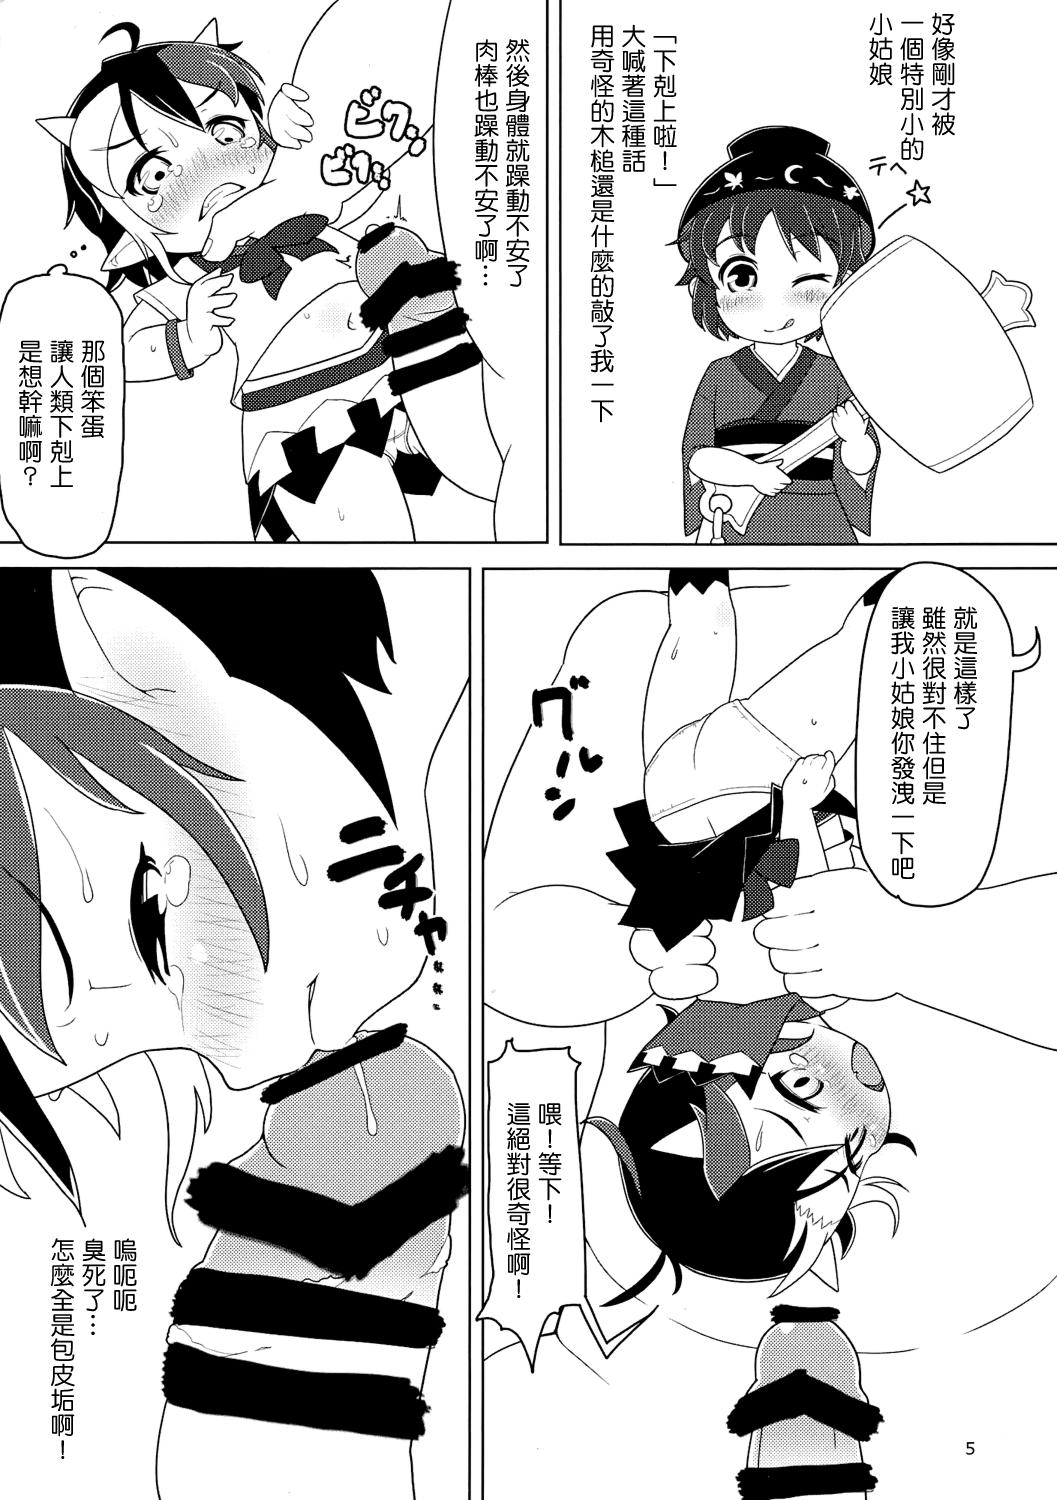 Chacal Reversible - Touhou project Gay Dudes - Page 4